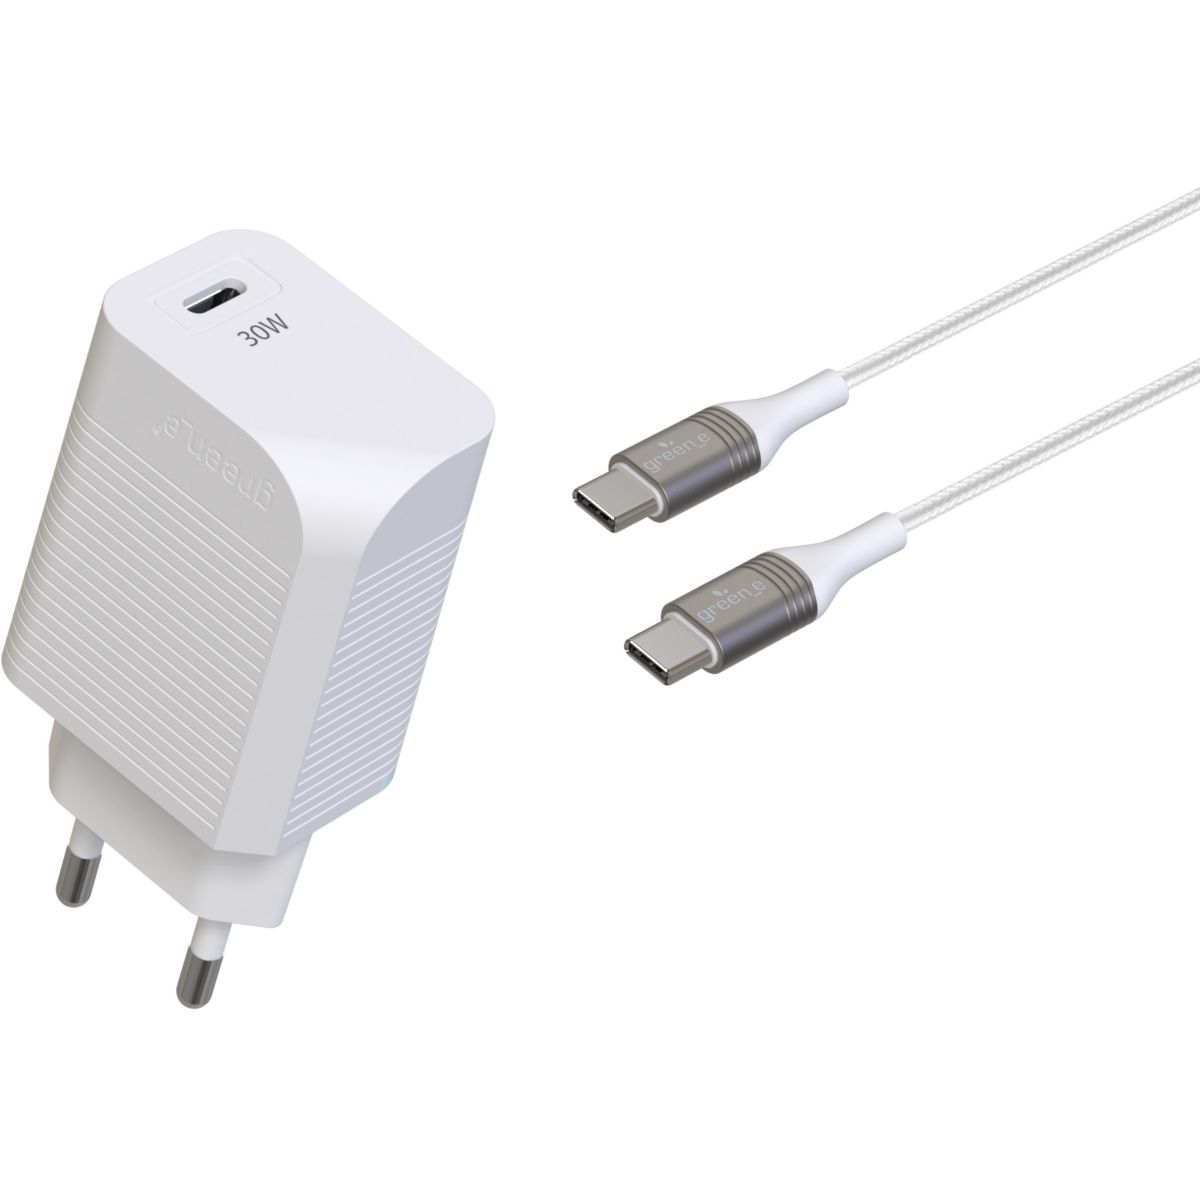 GREEN E Chargeur USB C USB-C 30W + Cable USB-C blanc